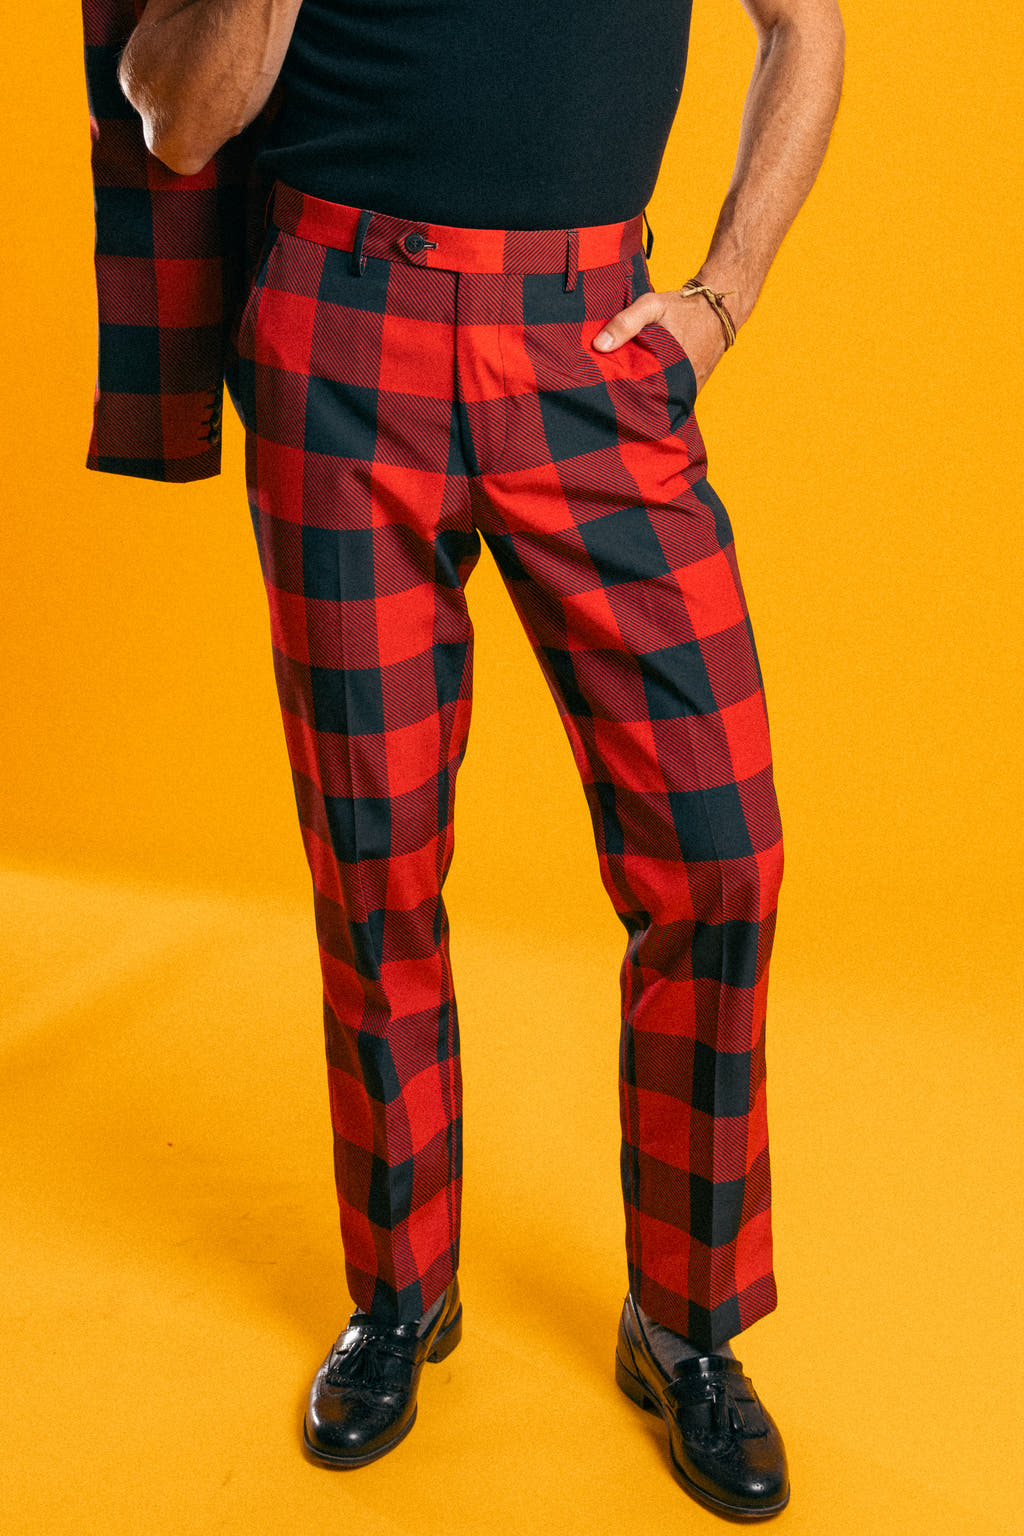 A person in The Red & Black Lumberjack | Buffalo Check Plaid Suit Pants with a close-up of black shoe and bracelet.